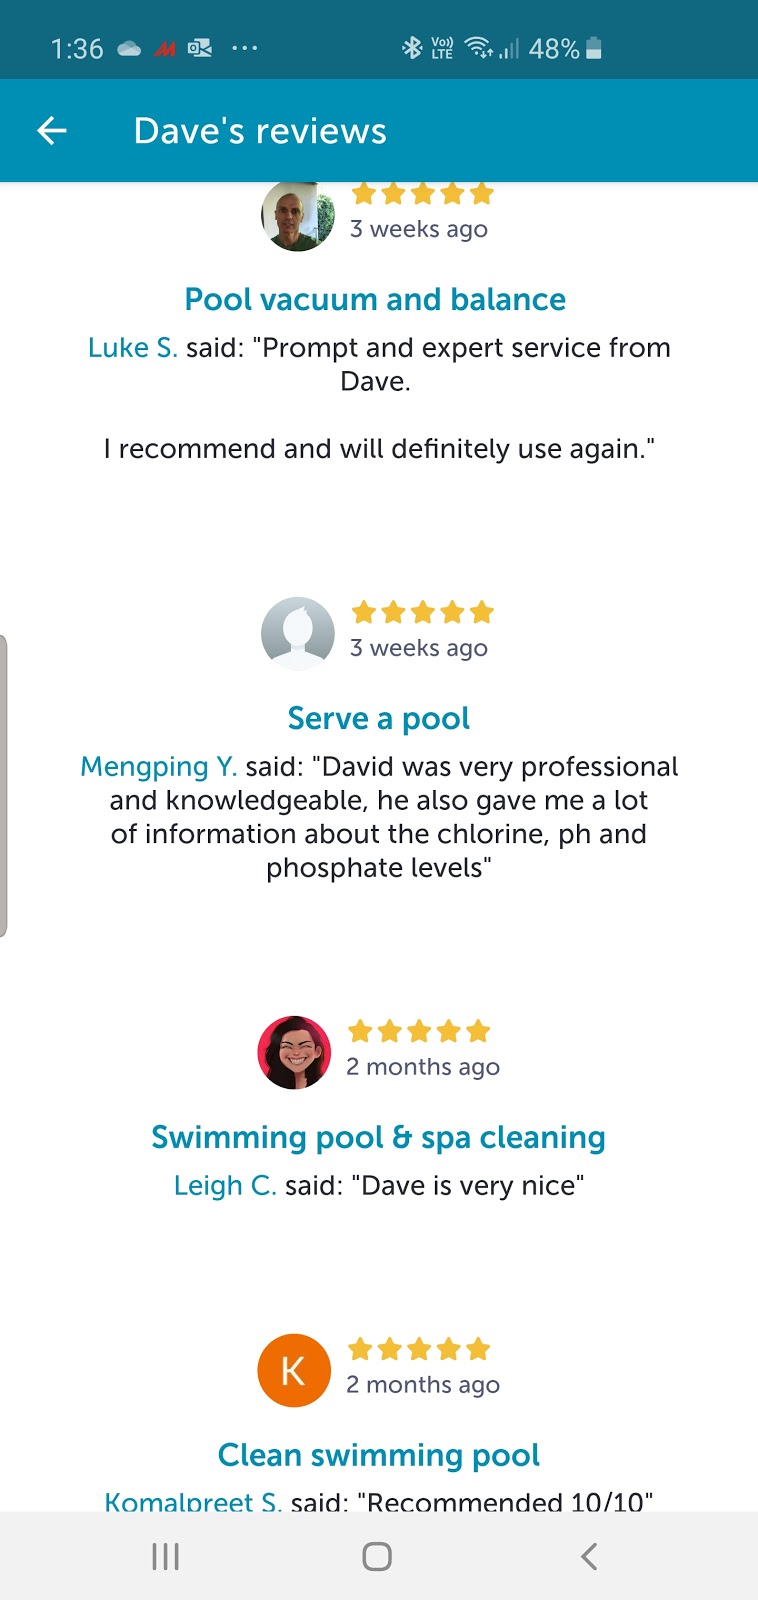 Poolwise | Suite 101, 19/102-114 Gladesville Blvd, Patterson Lakes VIC 3197, Australia | Phone: 0472 771 672